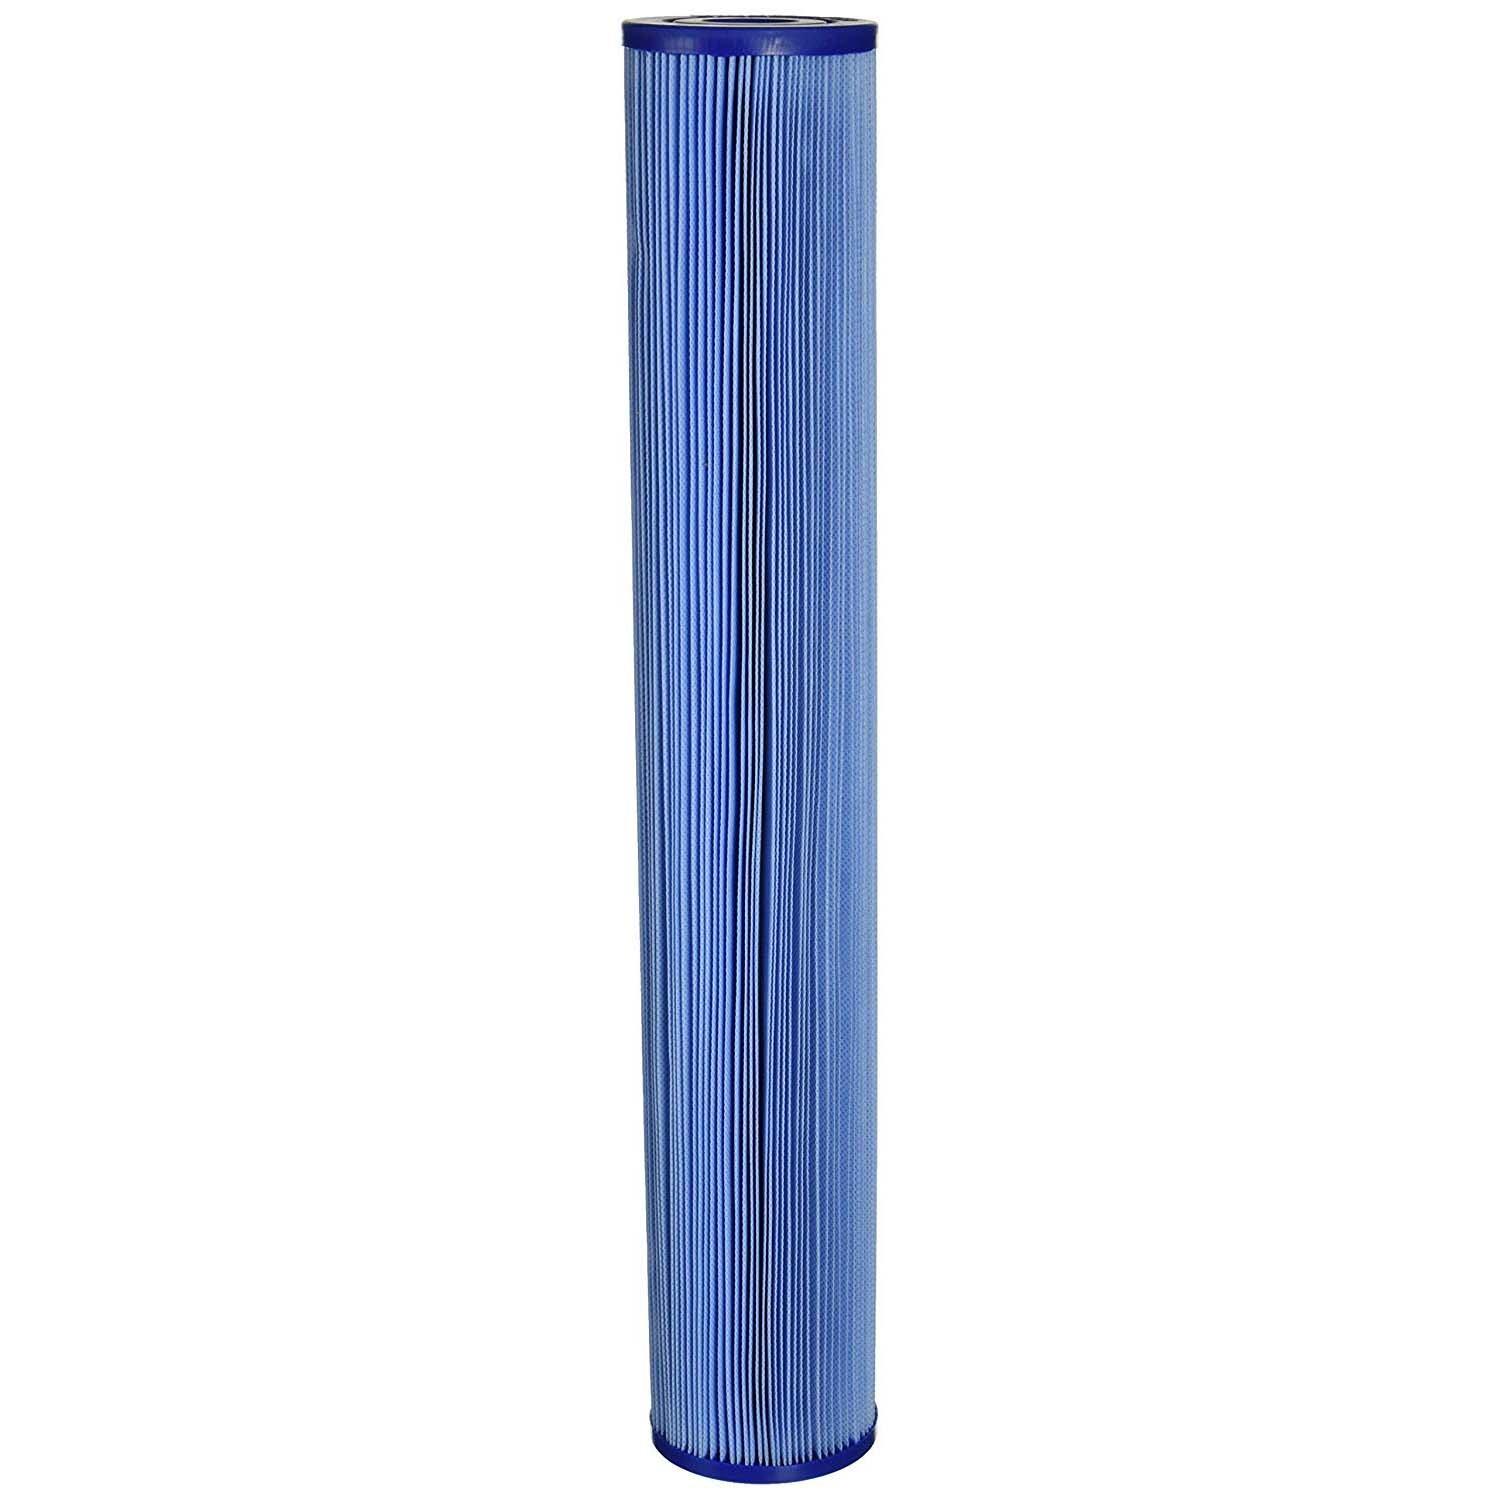 Pleatco Filter Cartridge for Rainbow Hi Flow 145 Antimicrobial